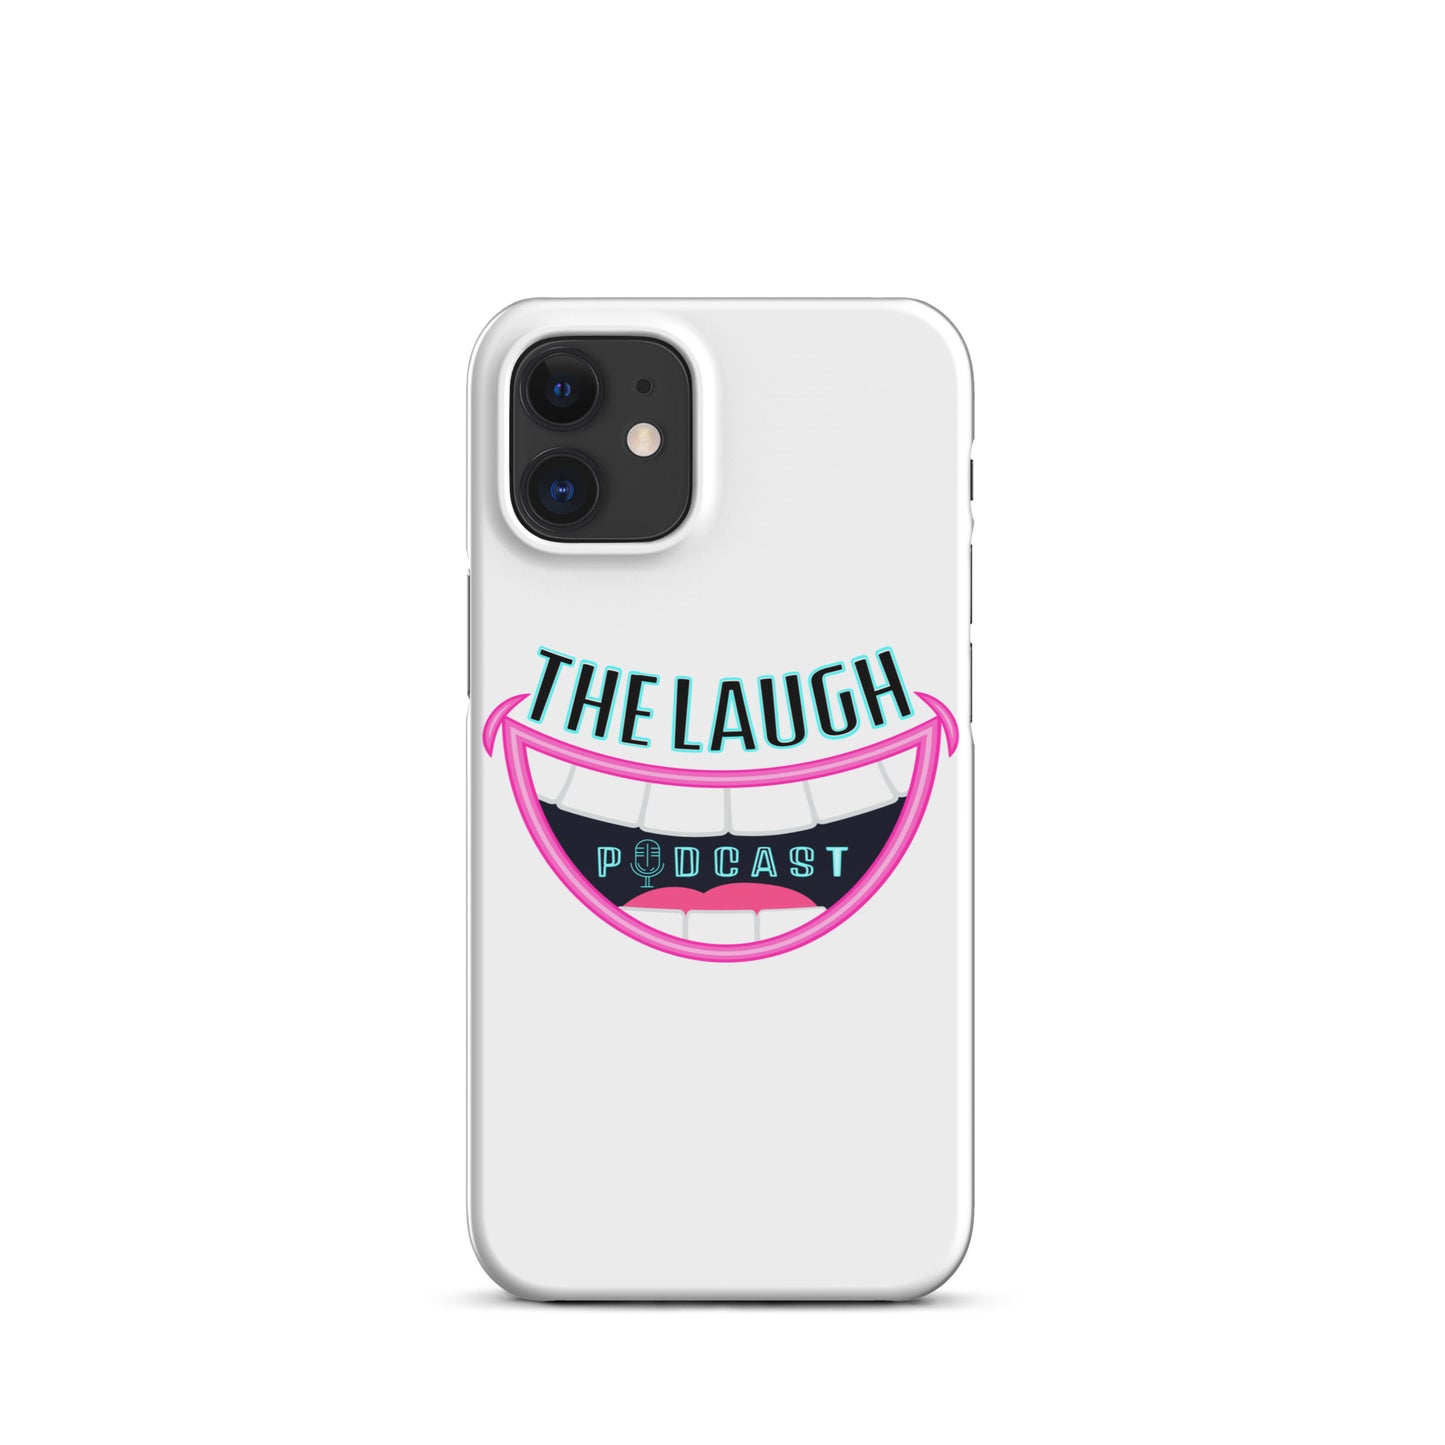 Laugh Podcast Snap case for iPhone® - Blue